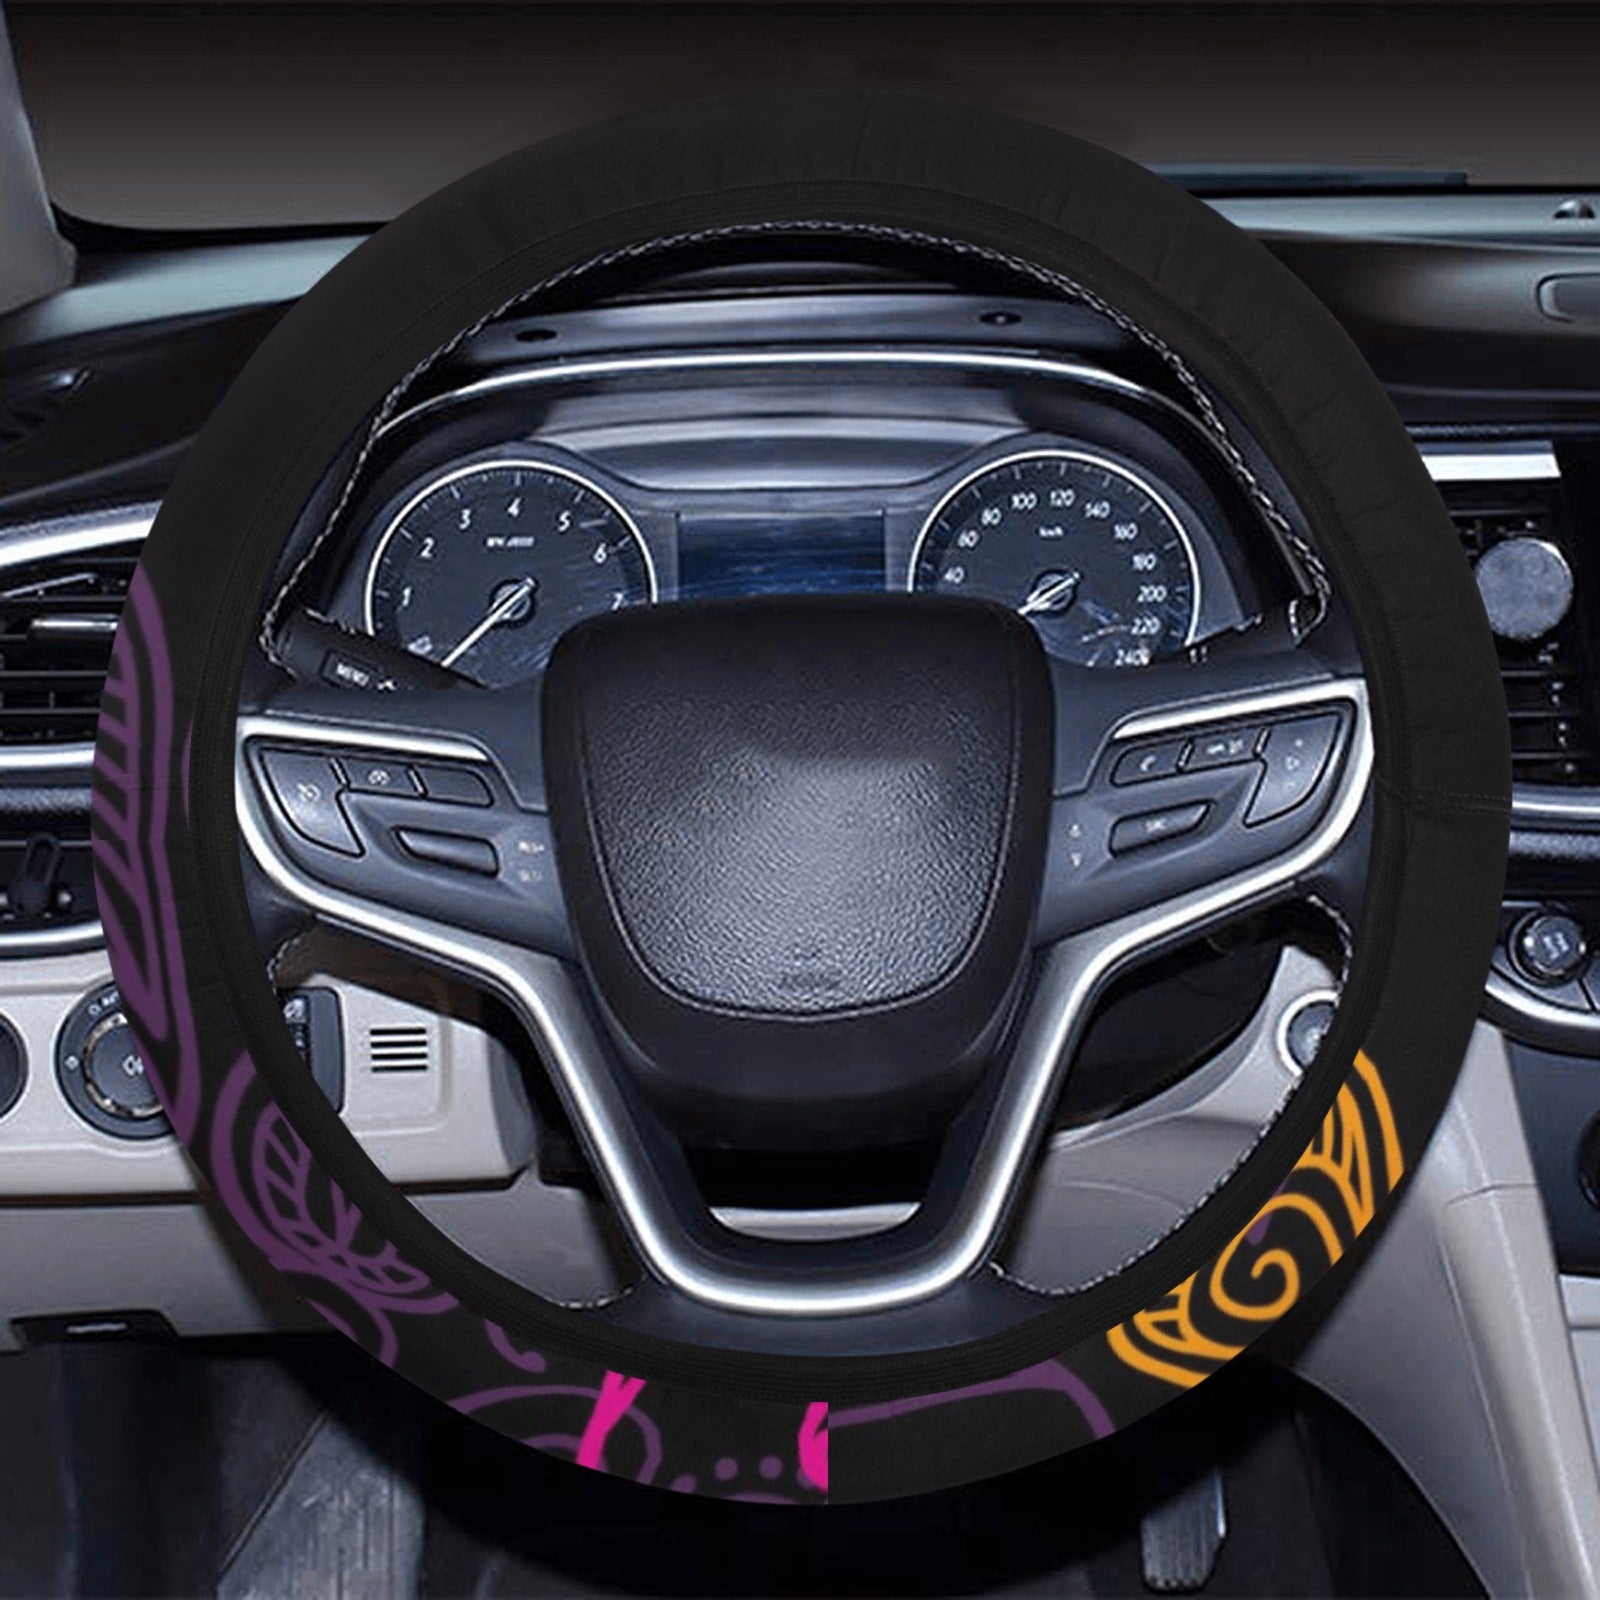 Floral Decor Steering Wheel Cover